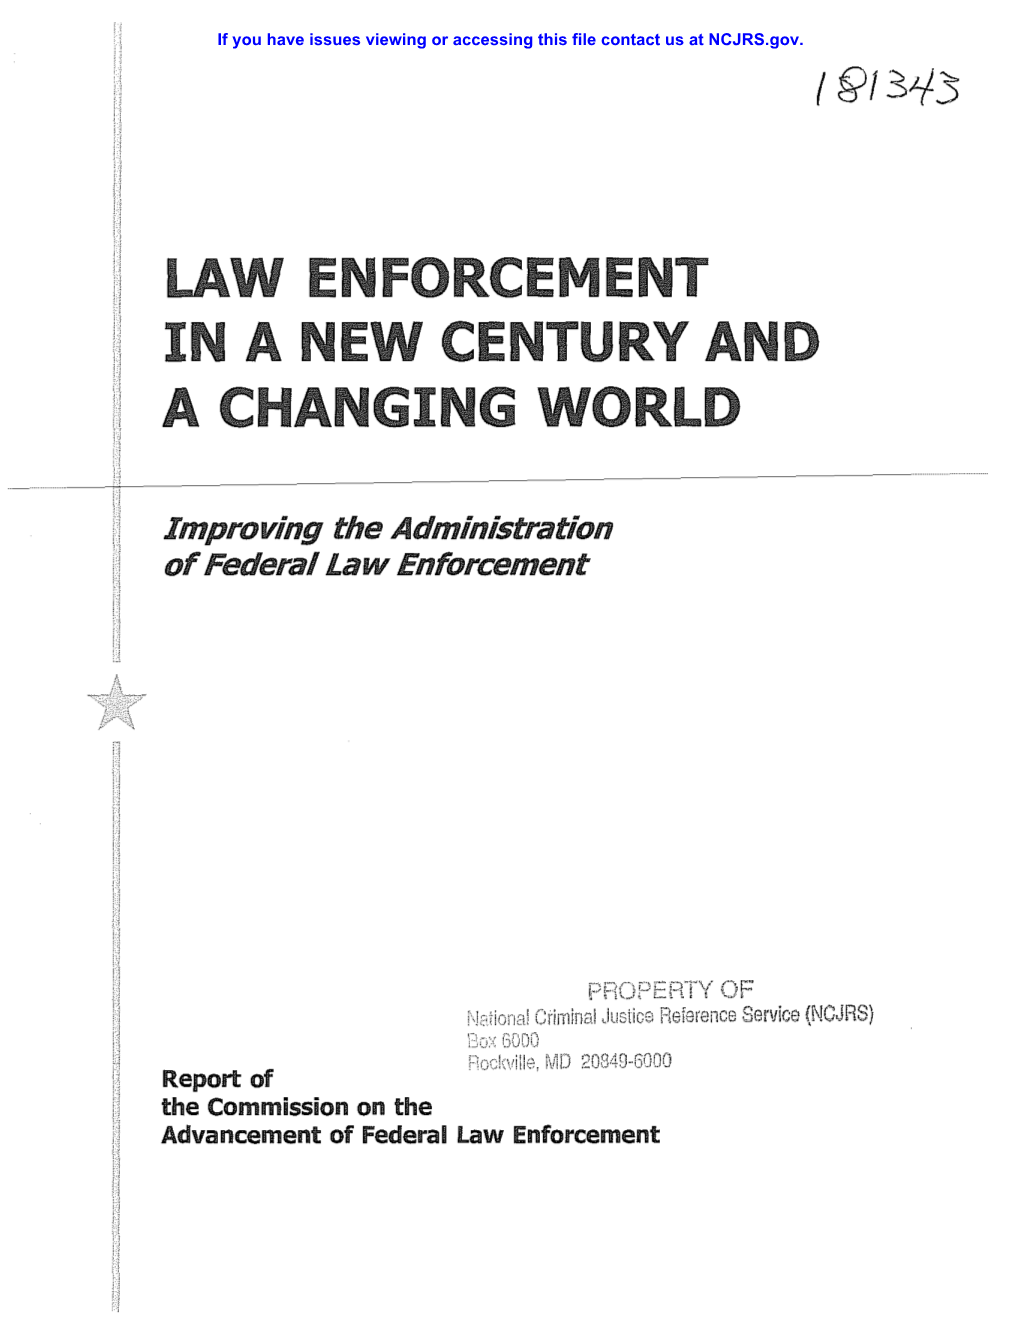 Report to the Commission on the Advancement of Federal Law Enforcement